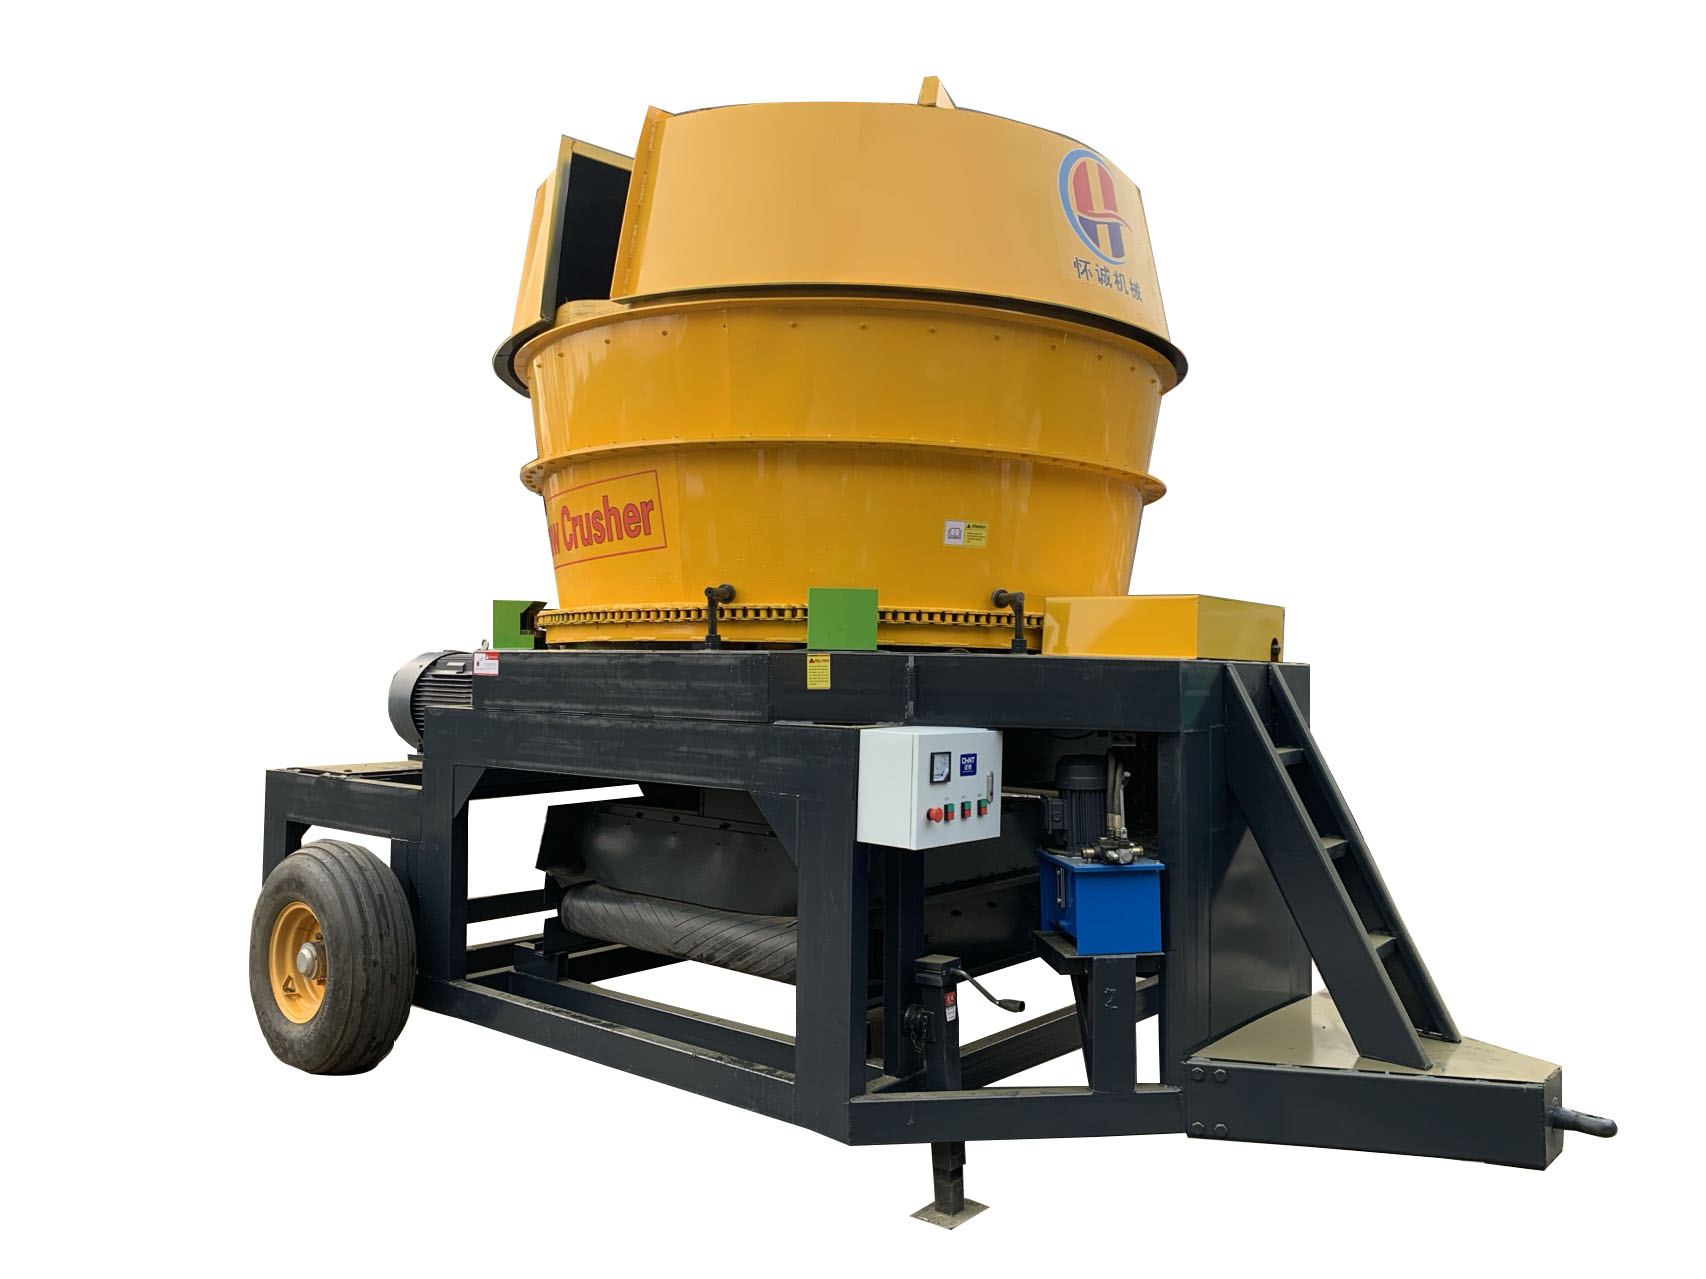 Straw bale crusher: an efficient tool for agricultural applications